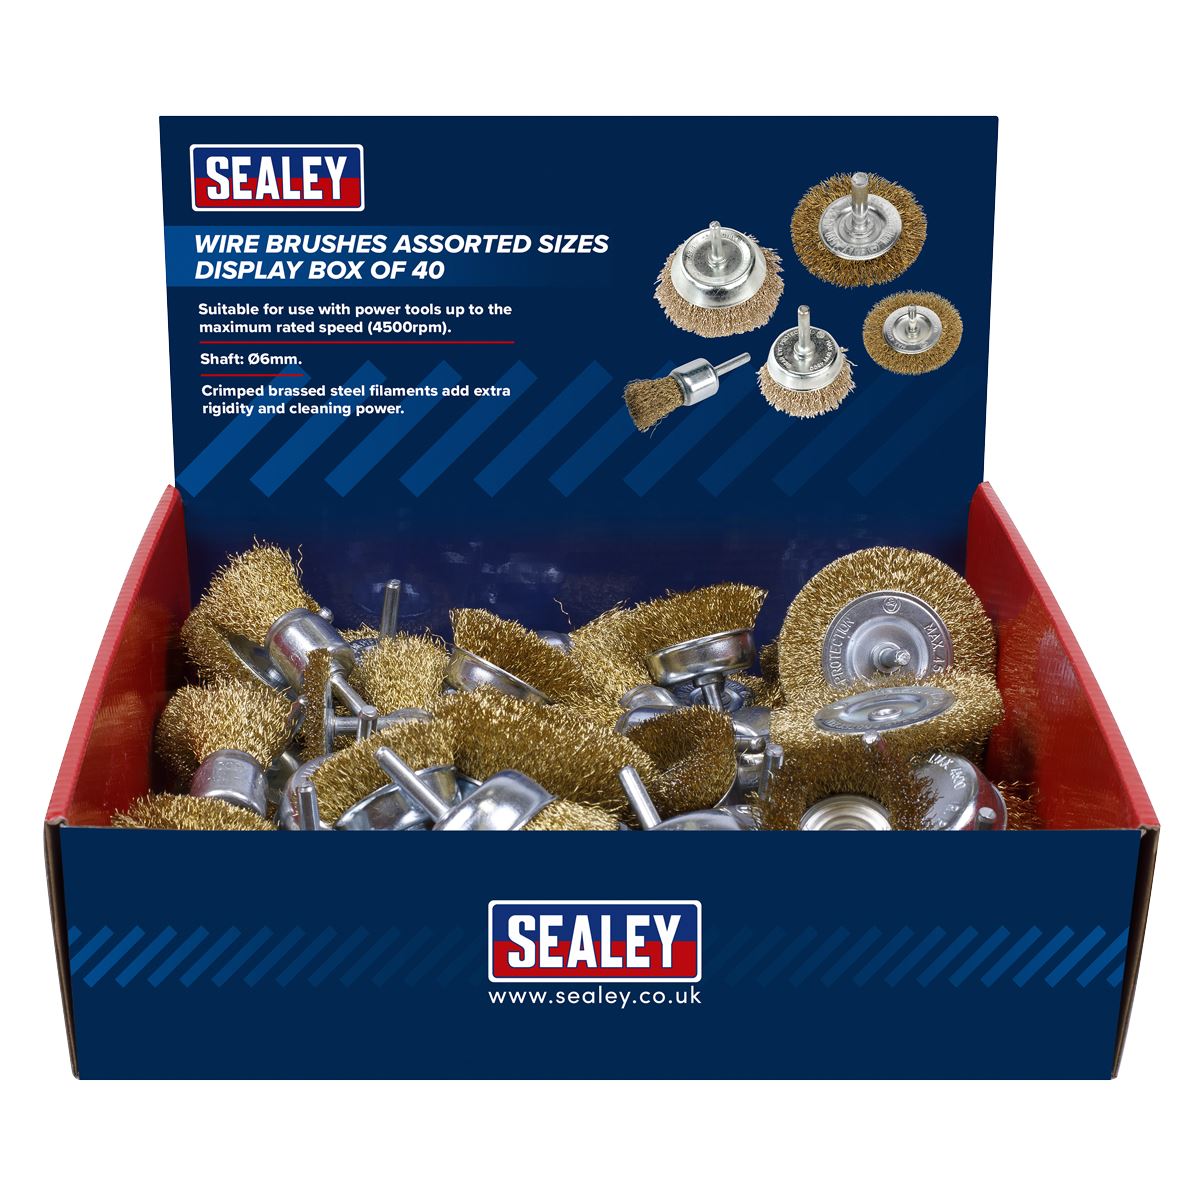 Sealey Crimped Wire Brushes - Assorted Sizes - Display Box of 40